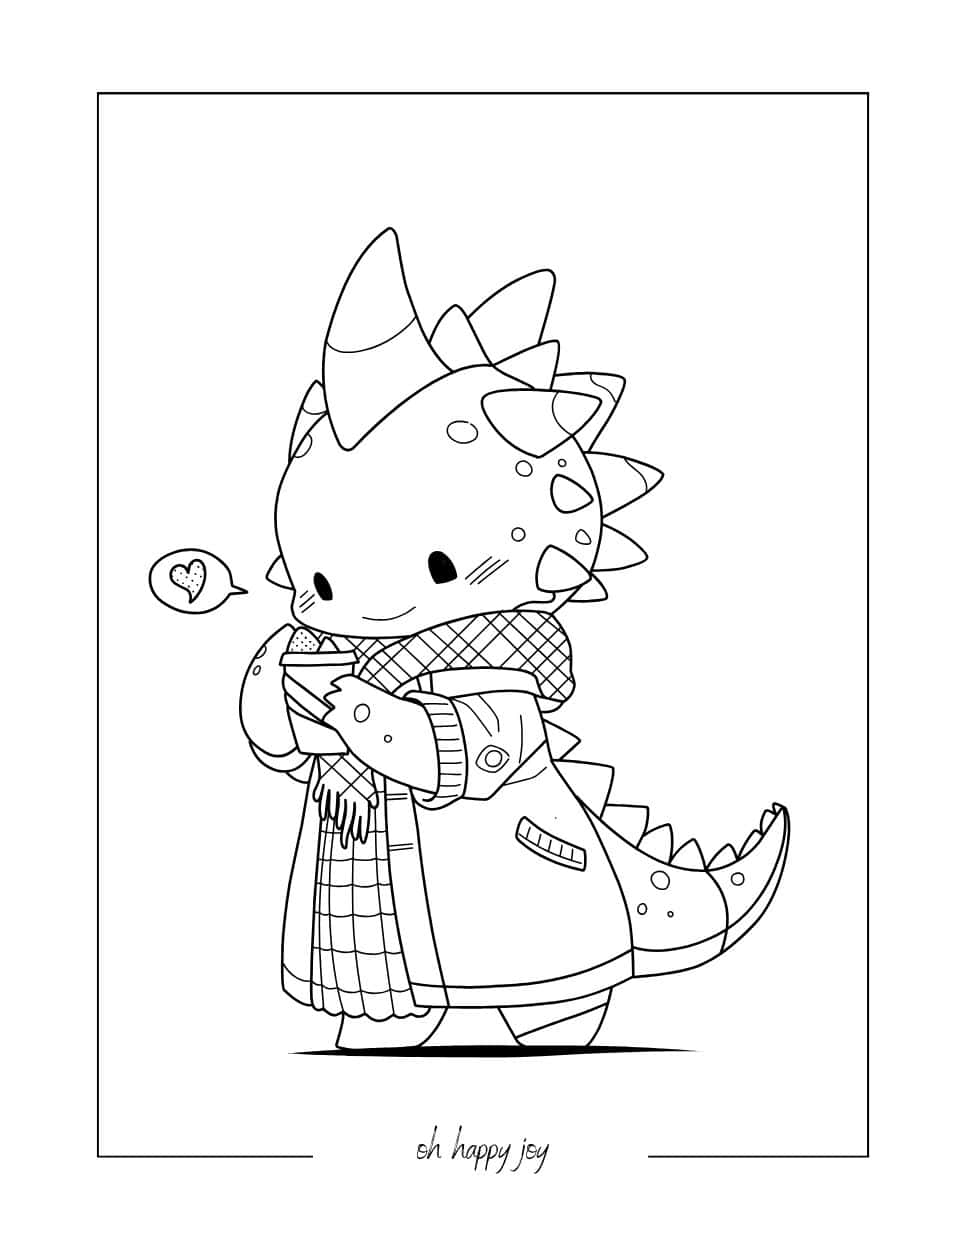 Dragon Drink Coloring Page